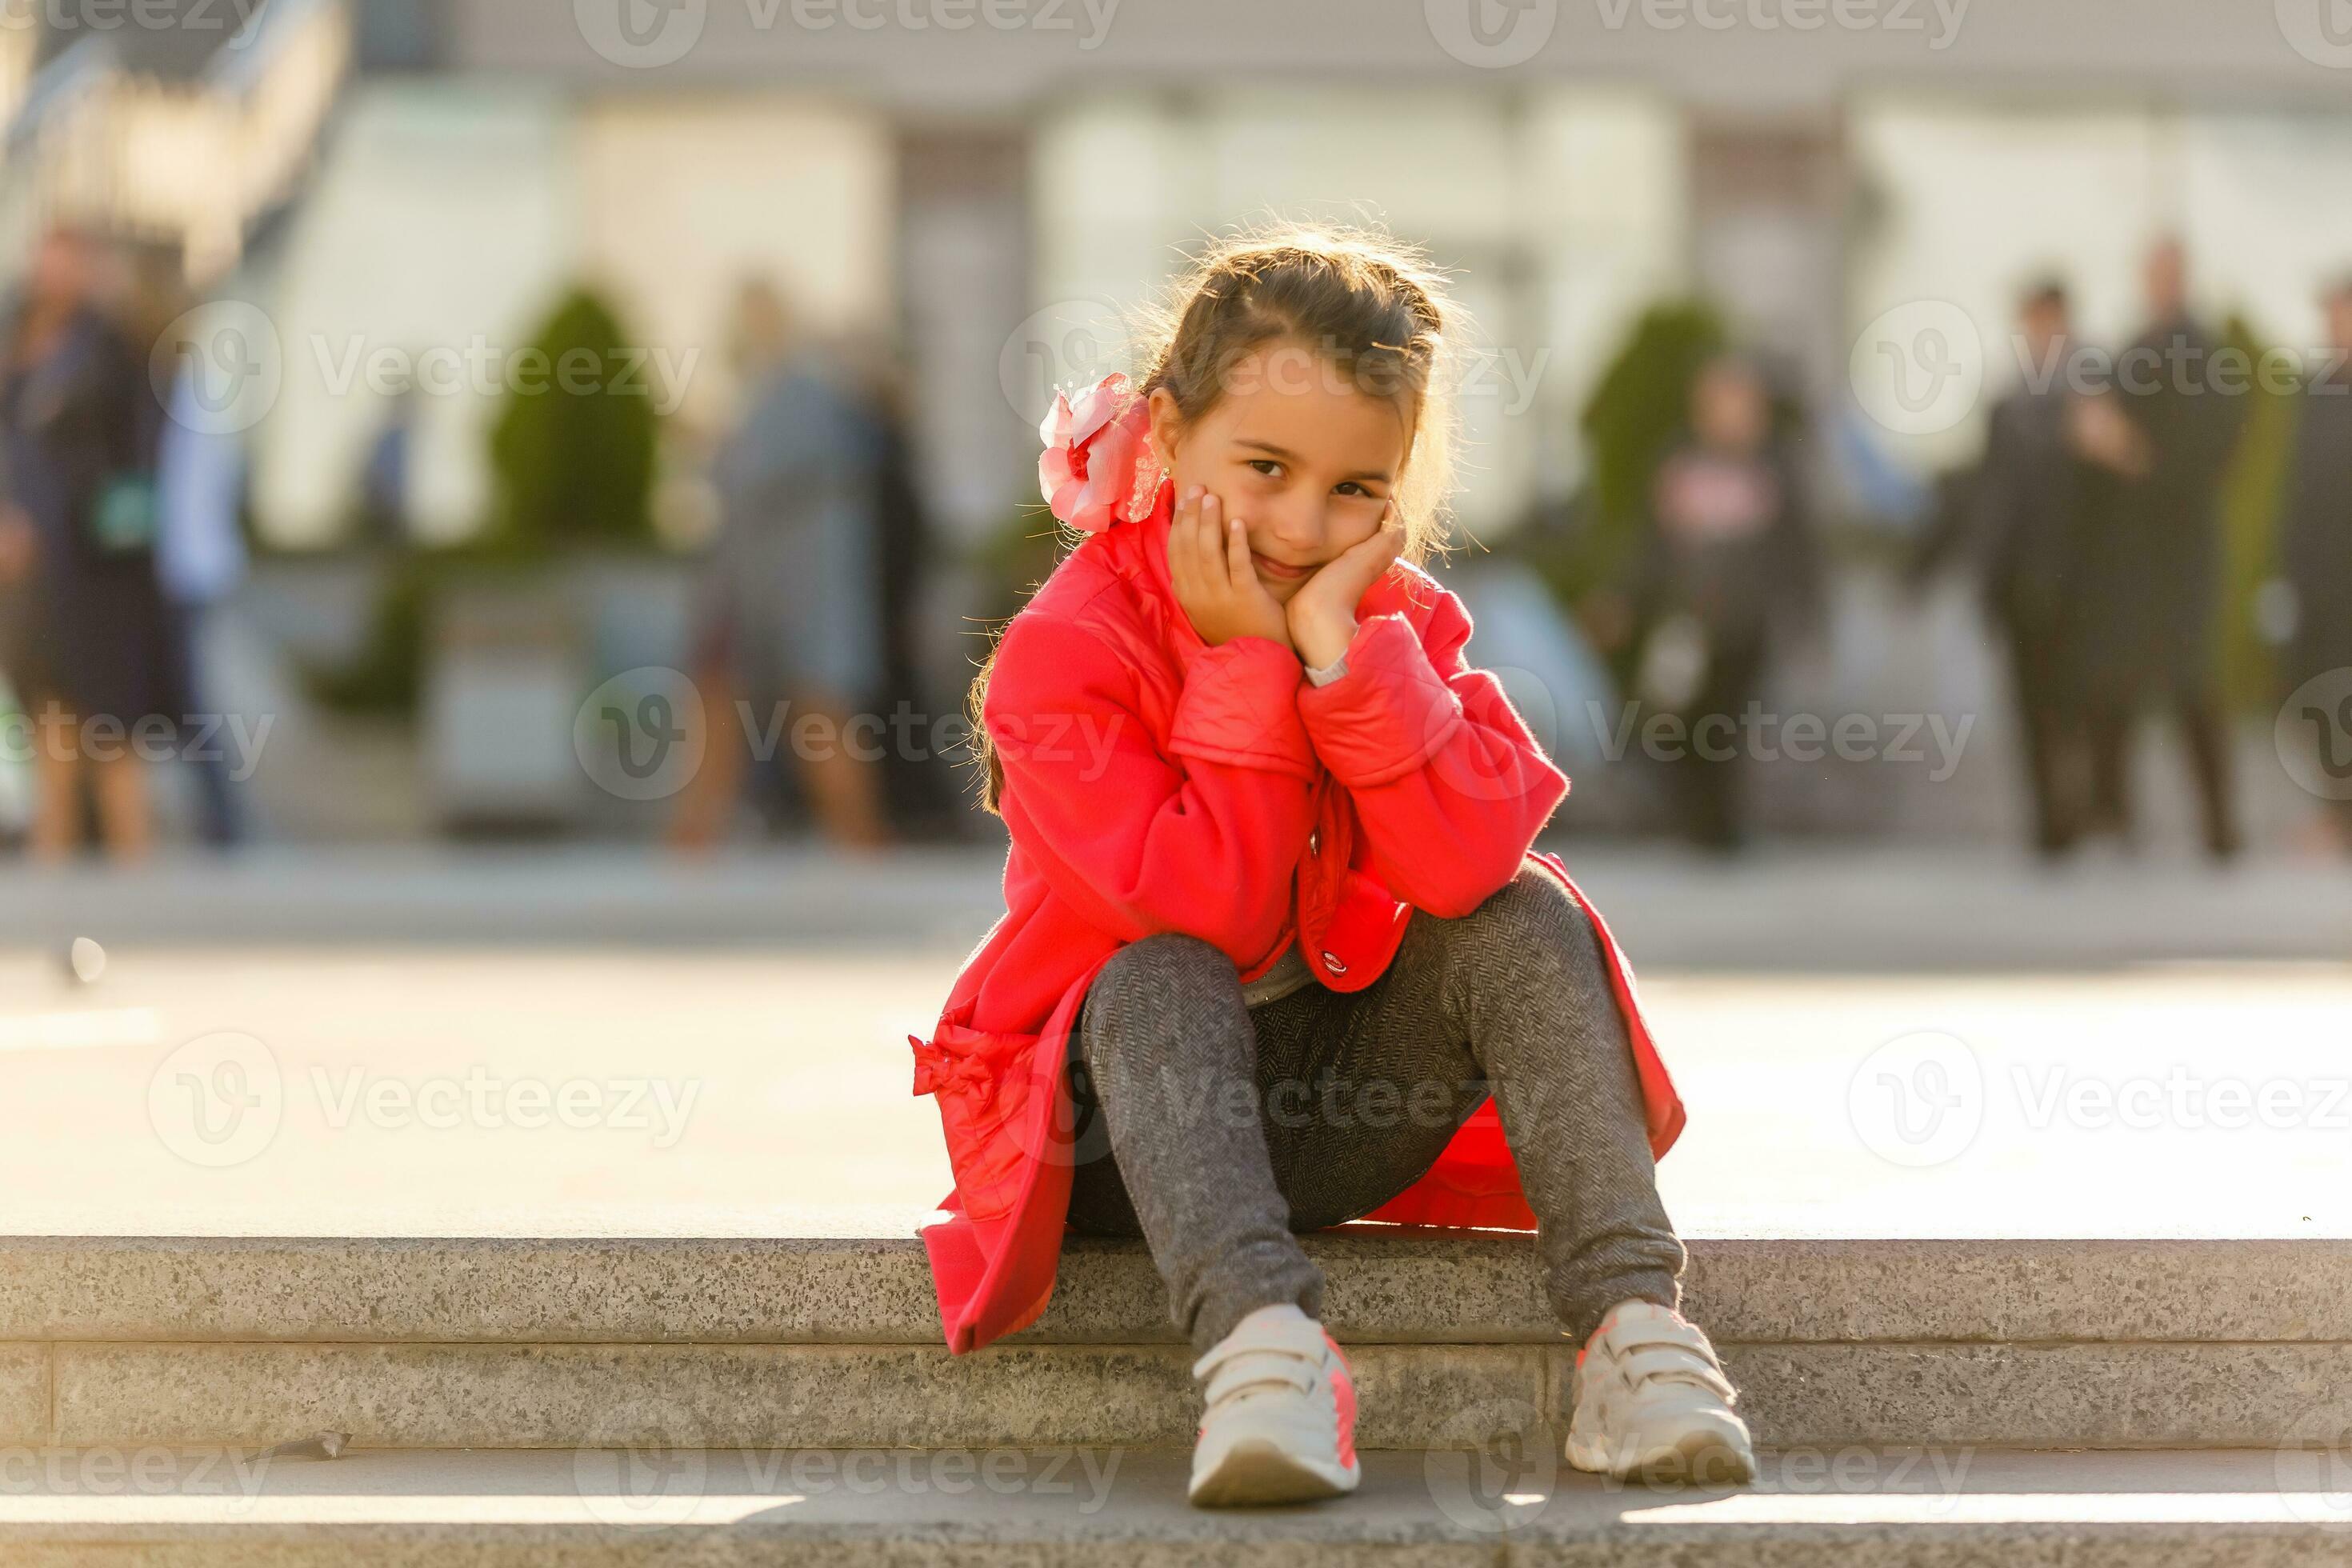 https://static.vecteezy.com/system/resources/previews/026/461/319/large_2x/cute-little-girl-wearing-red-coat-grey-leggings-and-white-sneakers-fashion-concept-photo.jpg